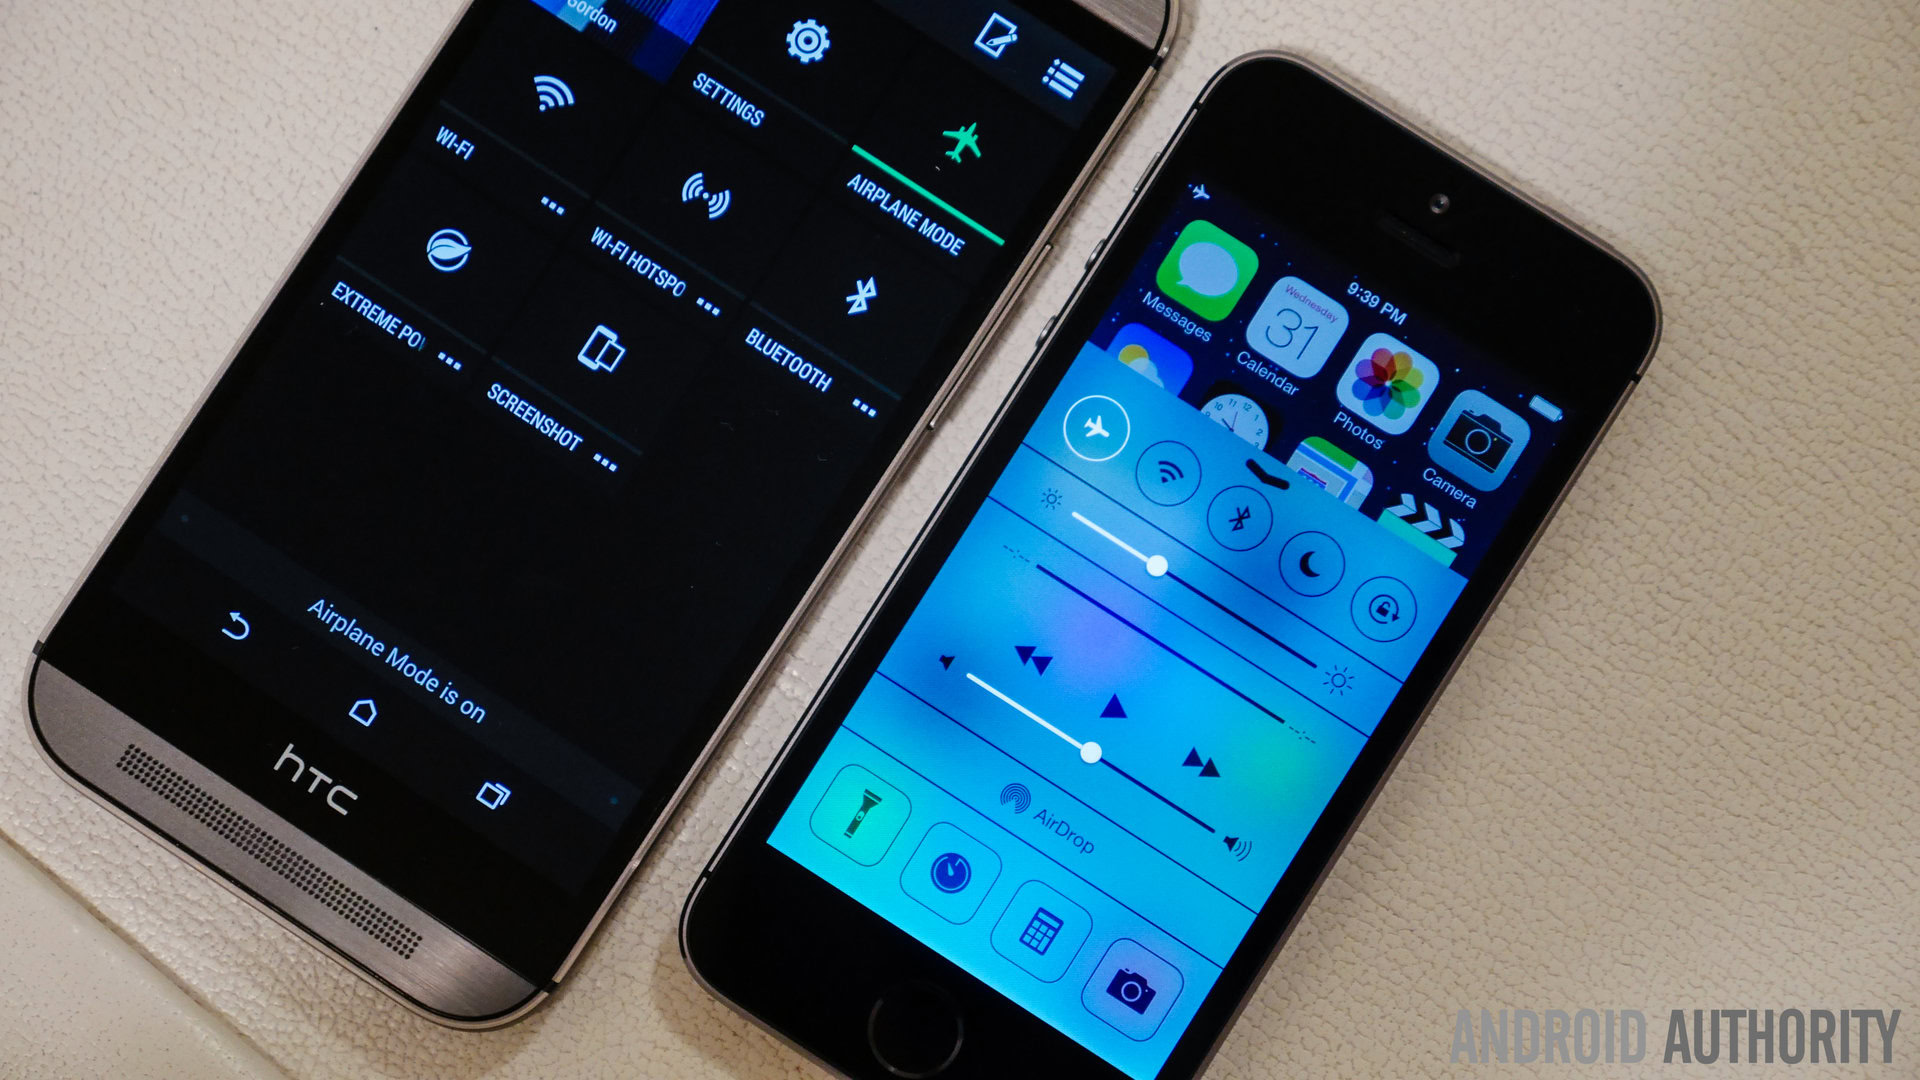 htc one m8 vs iphone 5s quick look aa (15 of 15)